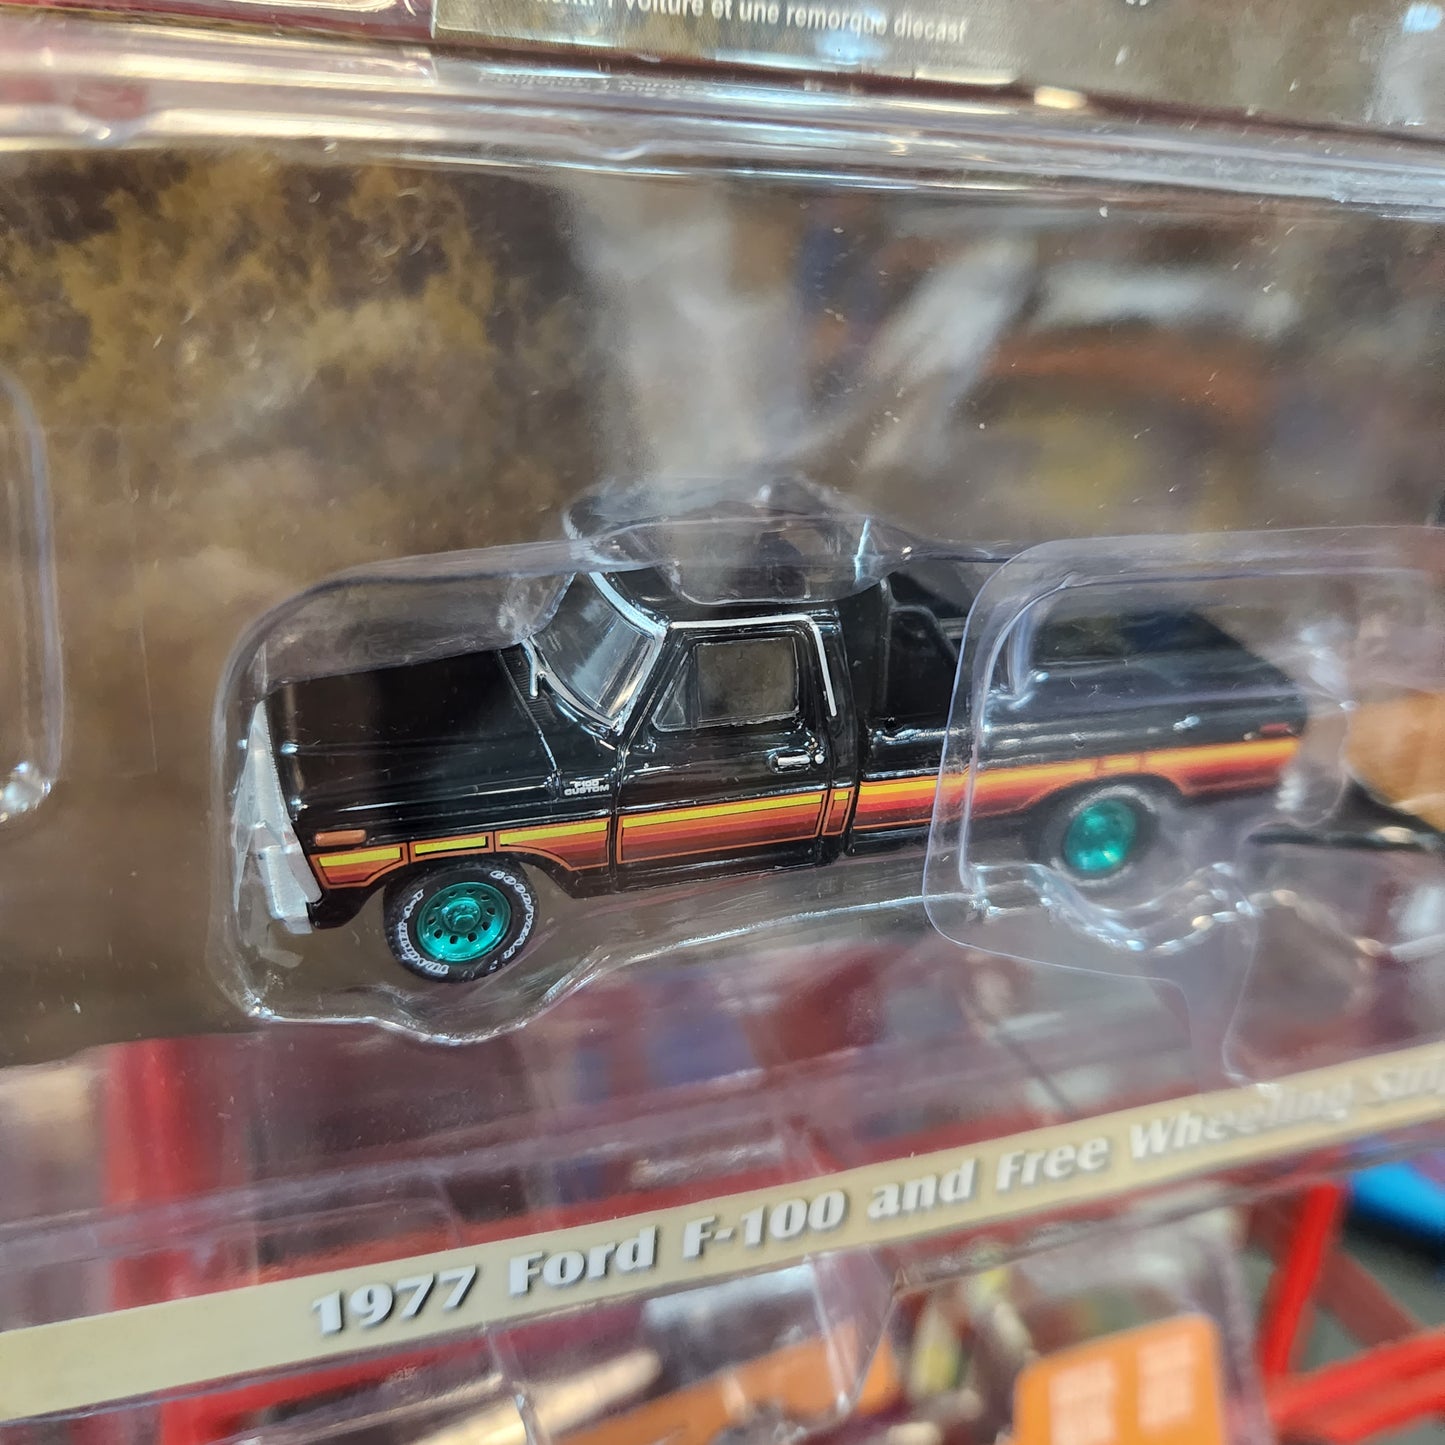 Greenlight - 'Hitch & Tow' Series 17 - 1977 Ford F100